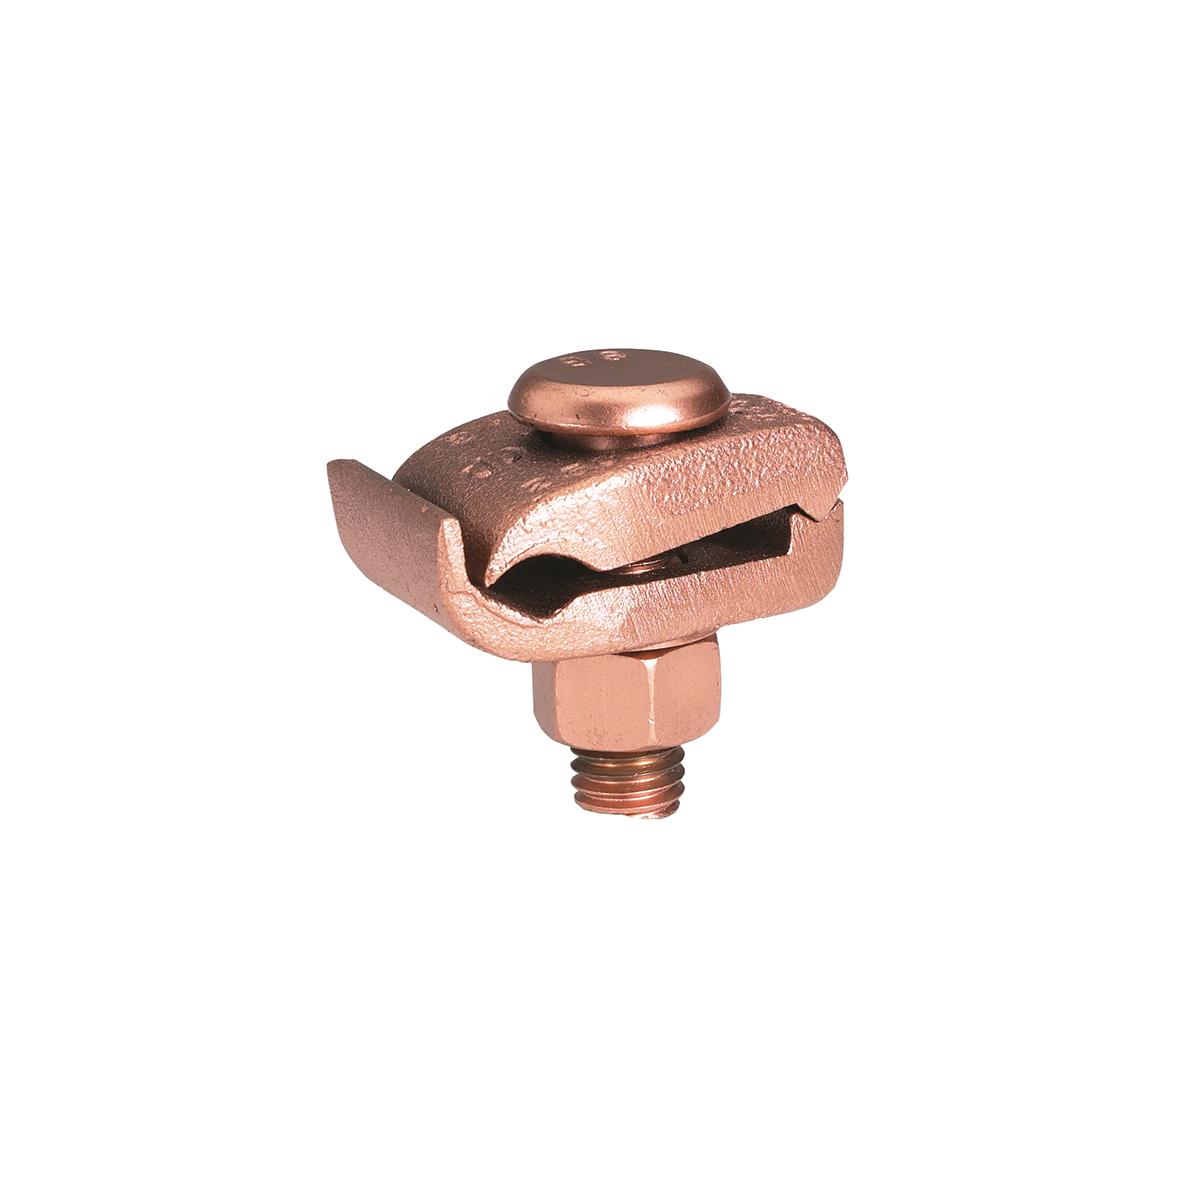 Hubbell GB34 Mechanical Grounding Connector, Cable to 1/4" Thick Bar, 300 kcmil - 500 kcmil, 1/2" Stud, 2-3/8 IN Width.  ; Features: High Copper Alloy Ground Connector For Joining A Range Of Cable To 1/4 IN Thick Bar, Type GB Separates Cable From Bar, One-Wrench Insta